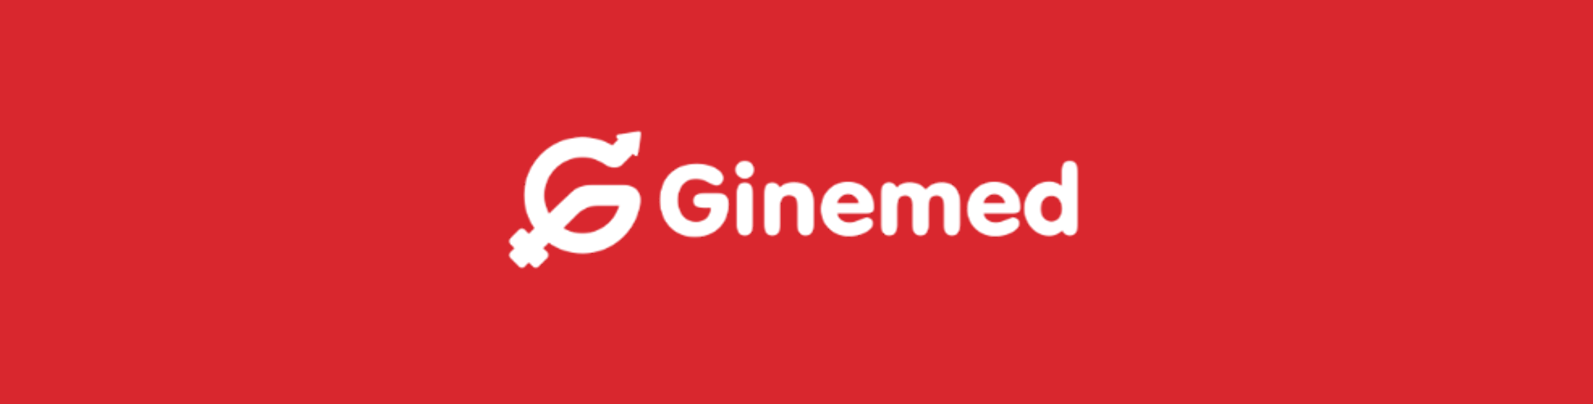 Ginemed